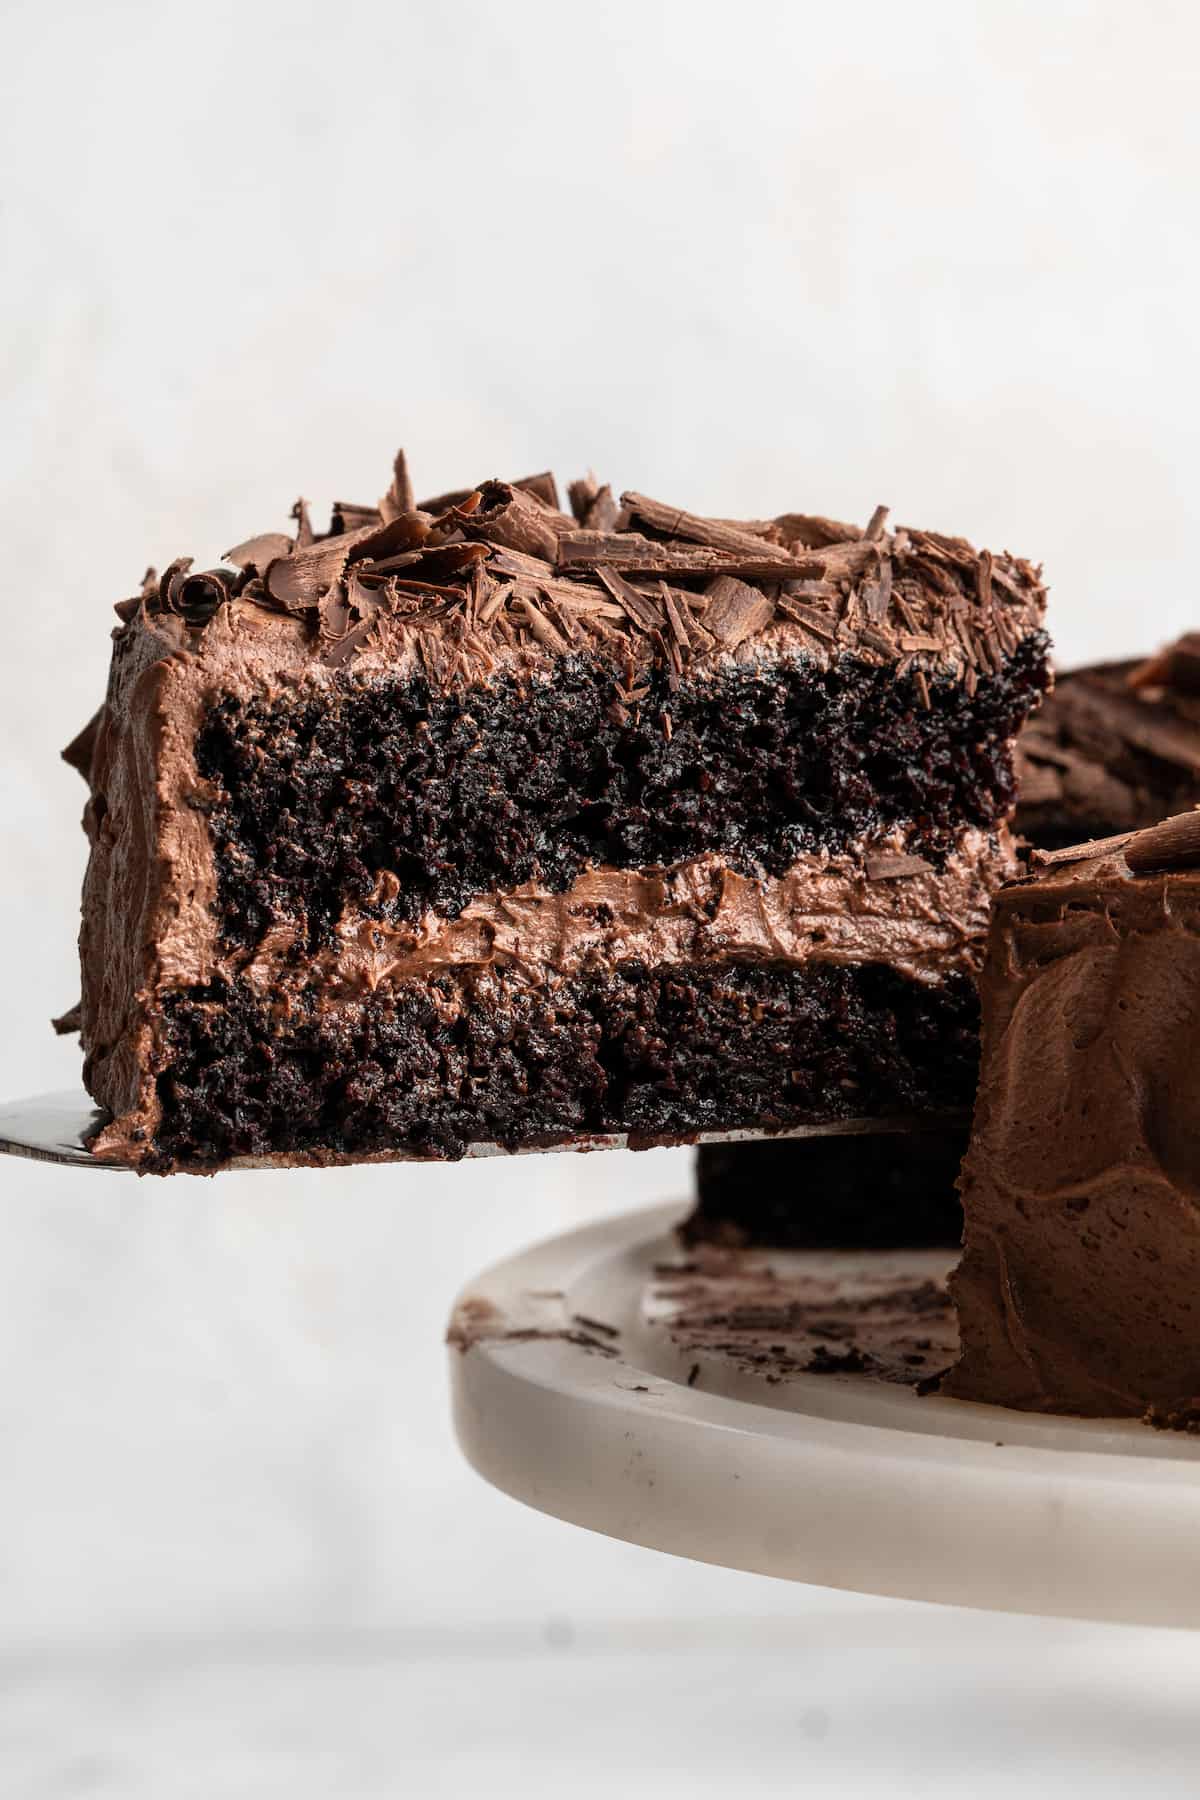 Removing slice of vegan chocolate cake from cake stand